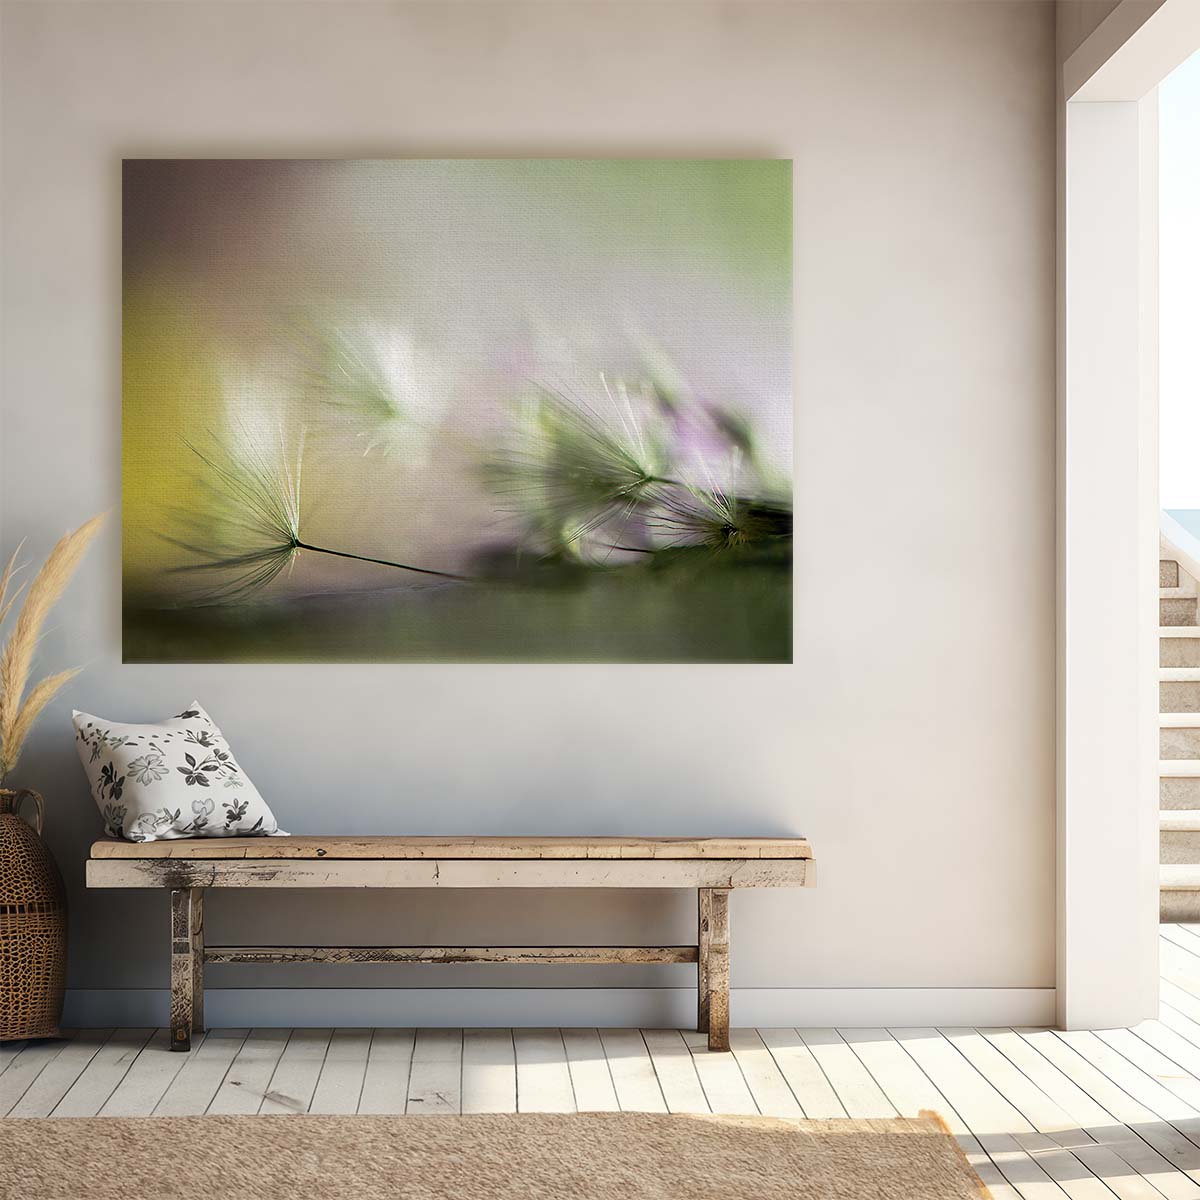 Romantic Dandelion Feather Bokeh Floral Wall Art by Luxuriance Designs. Made in USA.